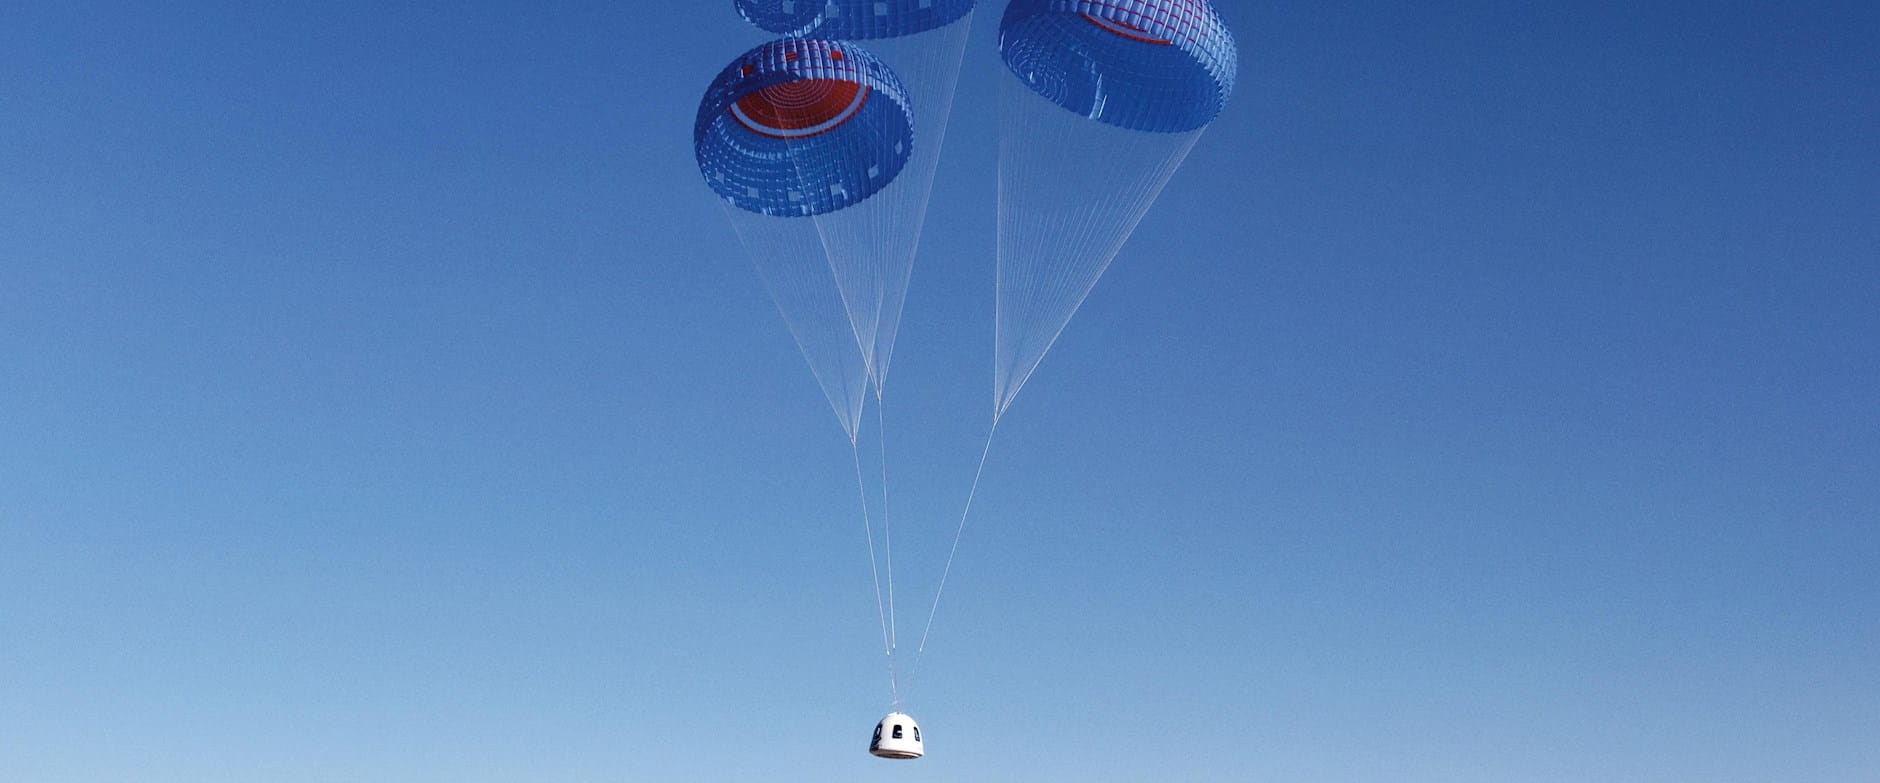 A space pod in the sky with three small colorful parachutes attached